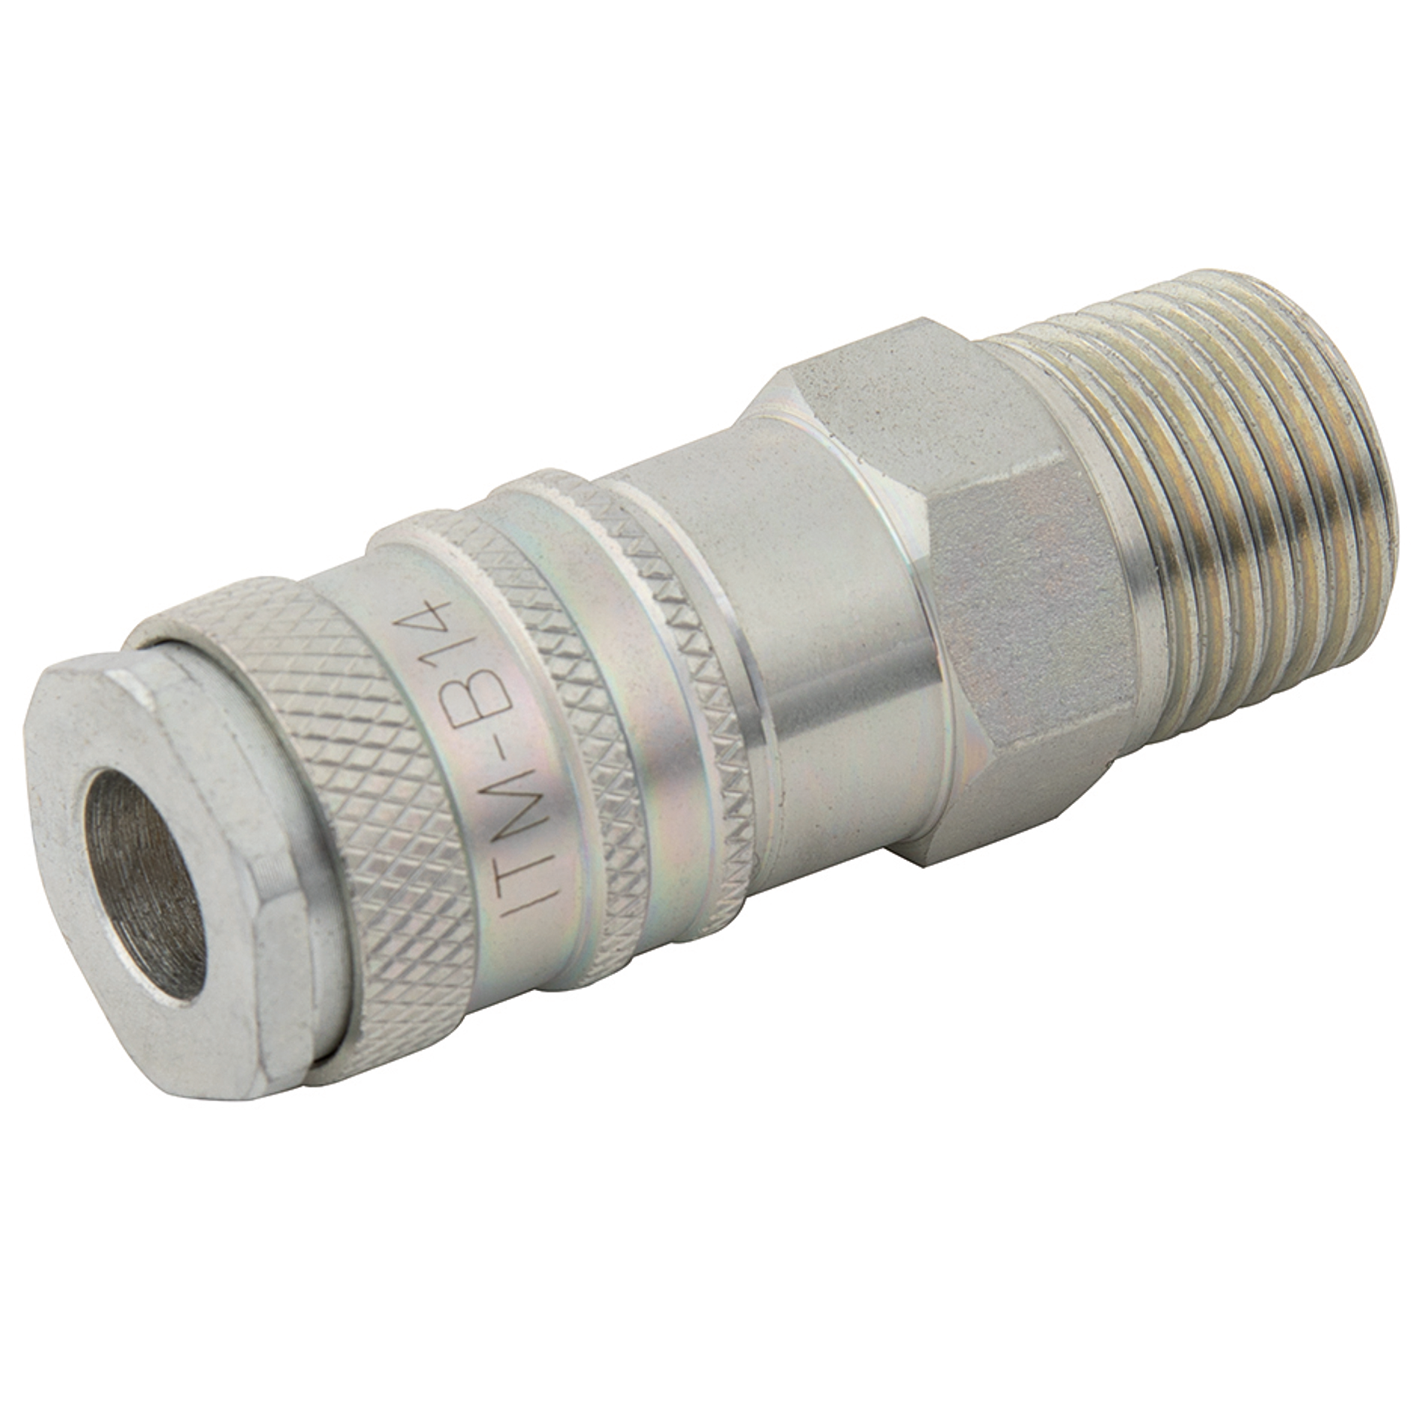 1/4" BSPT Male BE-14 Coupling